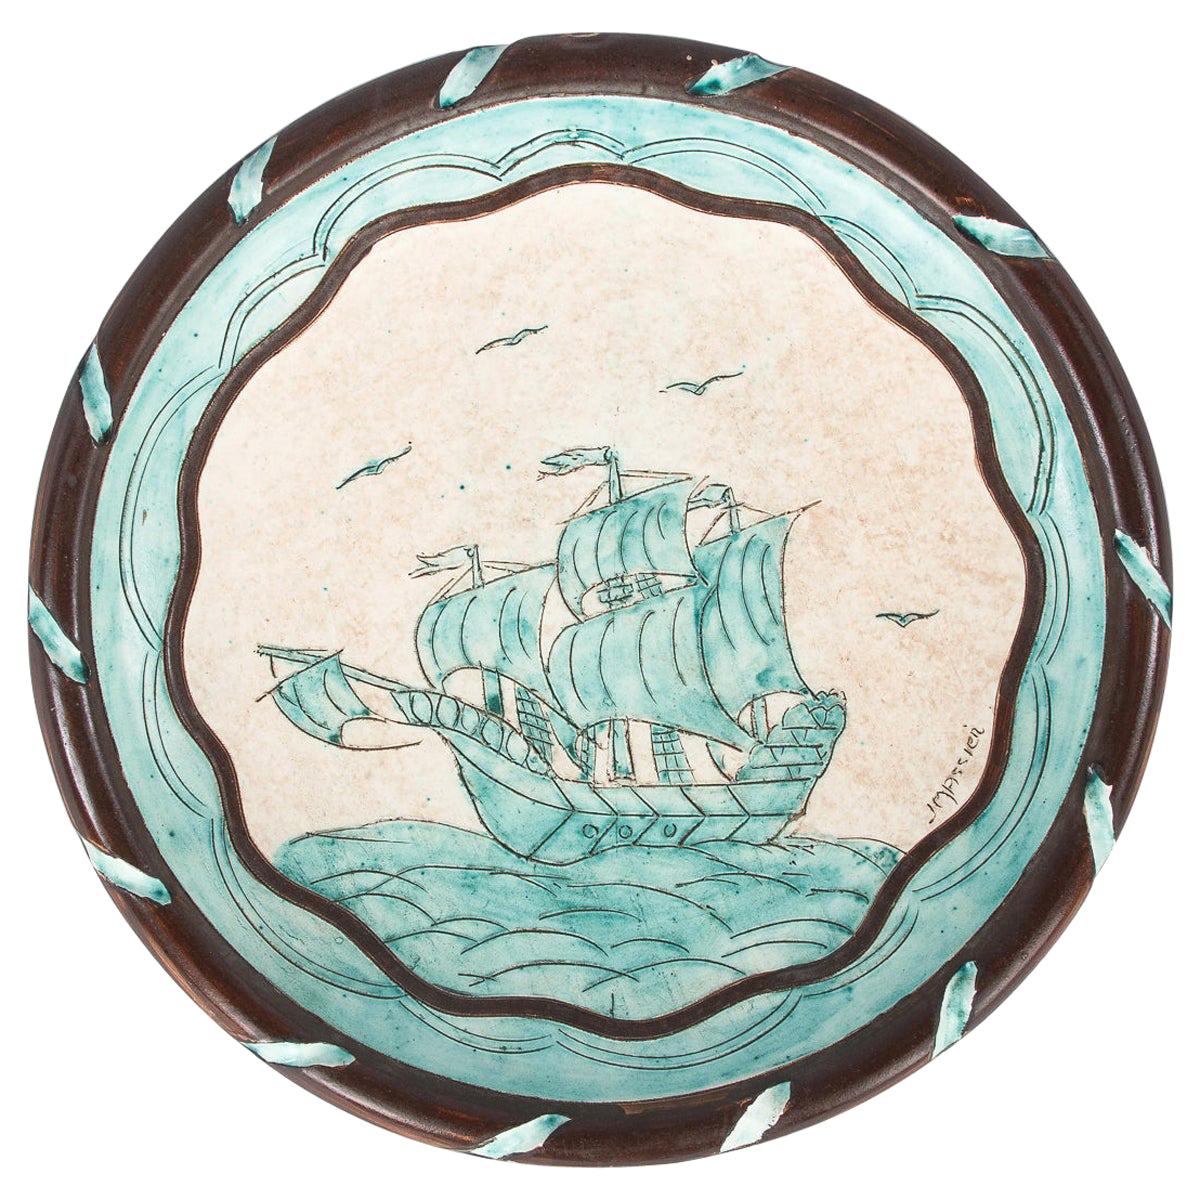 Jerome Massier Vallauris French Terracotta Dish with Sailboat, 1950s